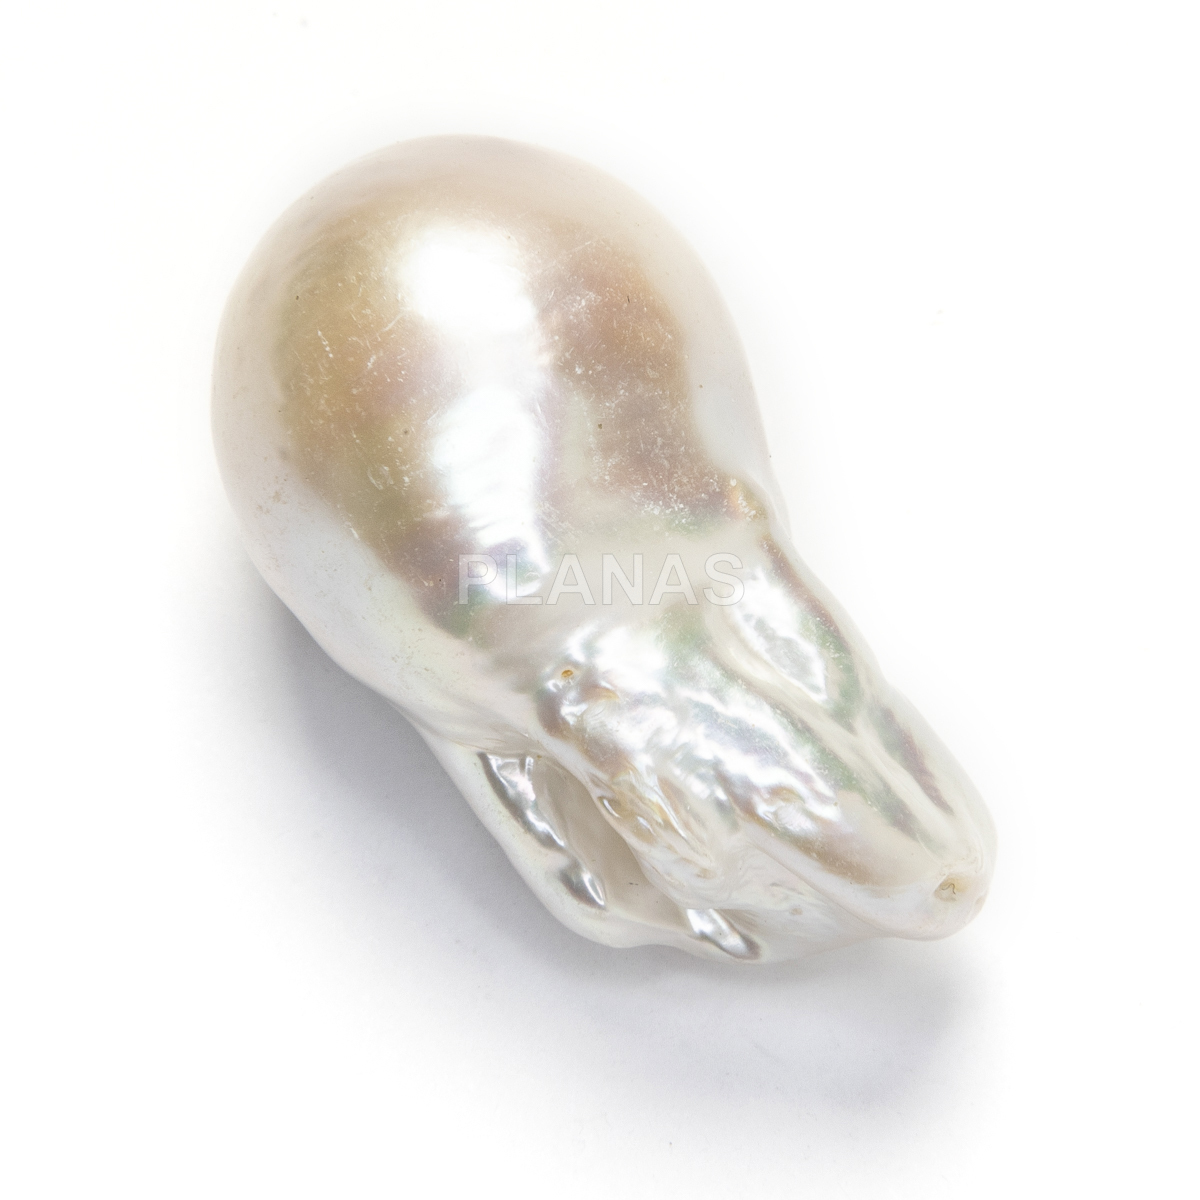 Cultured freshwater pearl without drilling. 30x17mm.